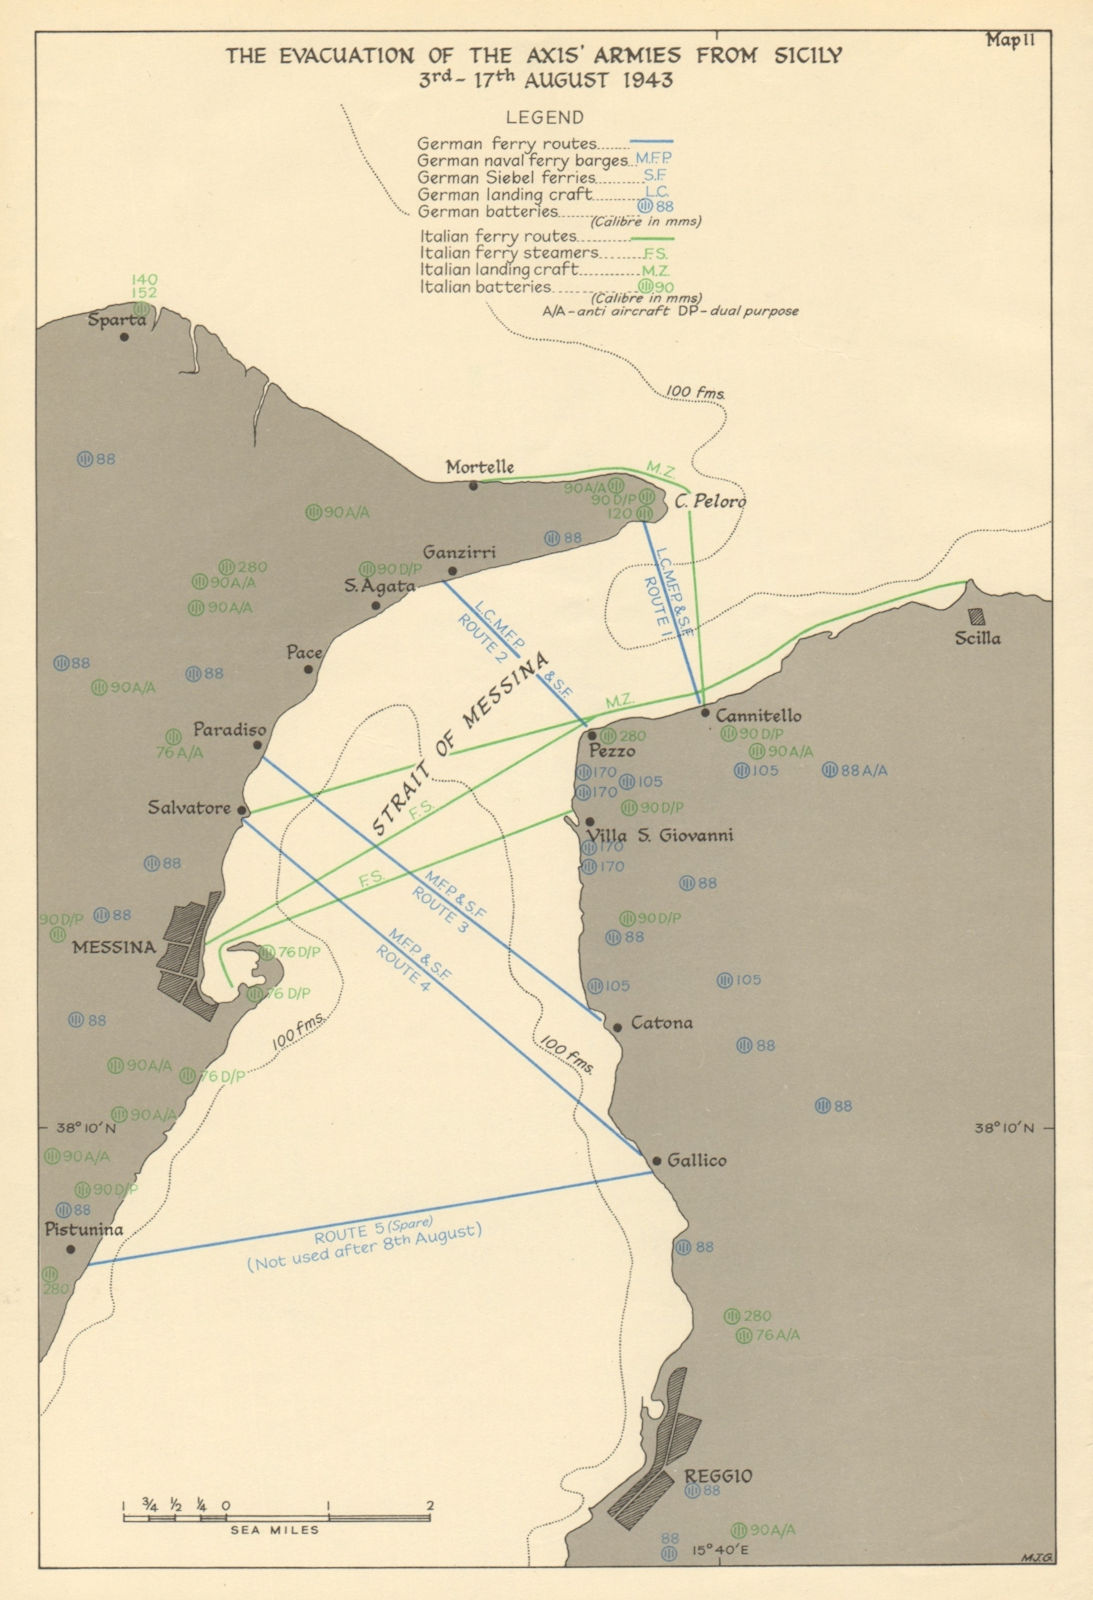 Axis Armies evacuation from Sicily 3-17 August 1943. Strait of Messina 1954 map